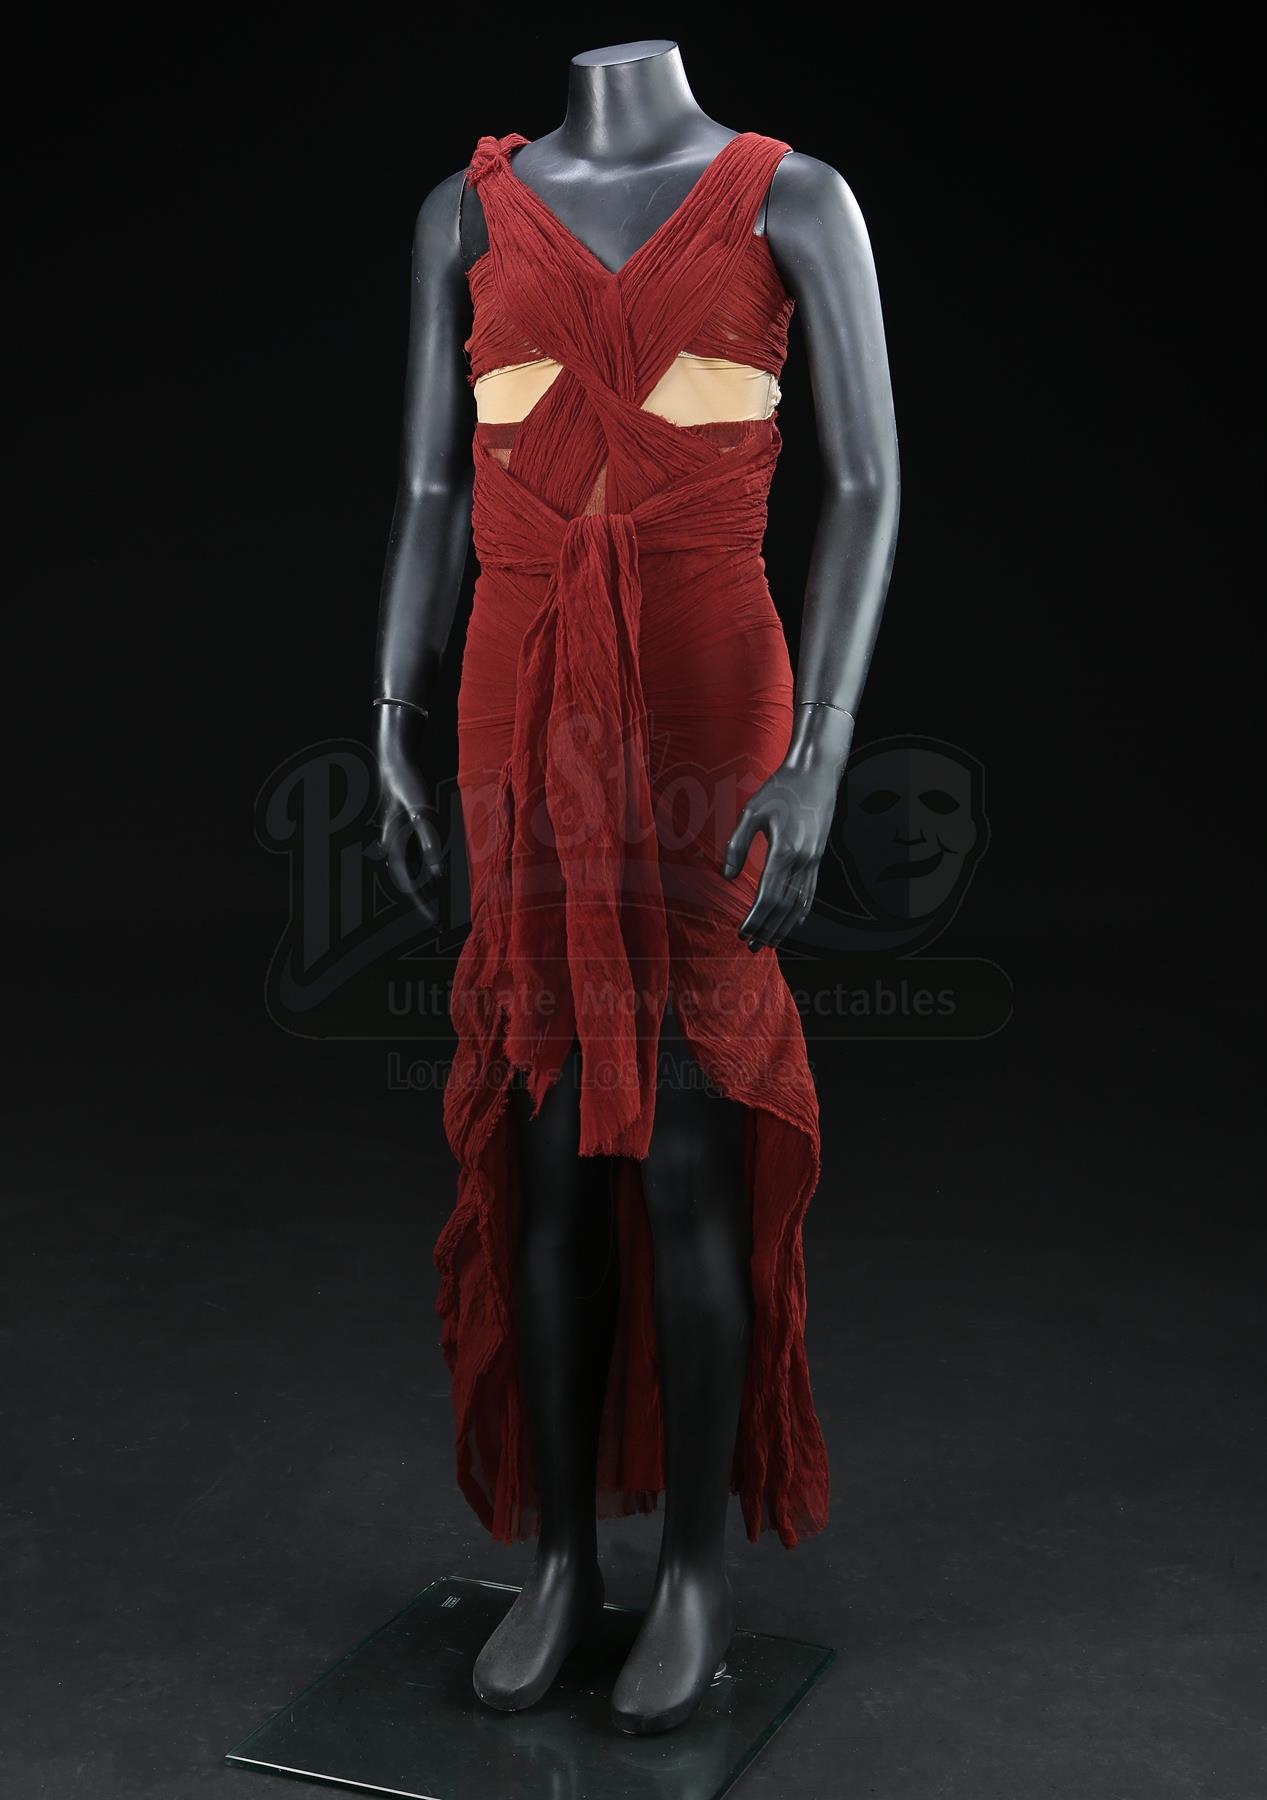 Mini Zaya's Red Afterlife Costume - Current price: $25